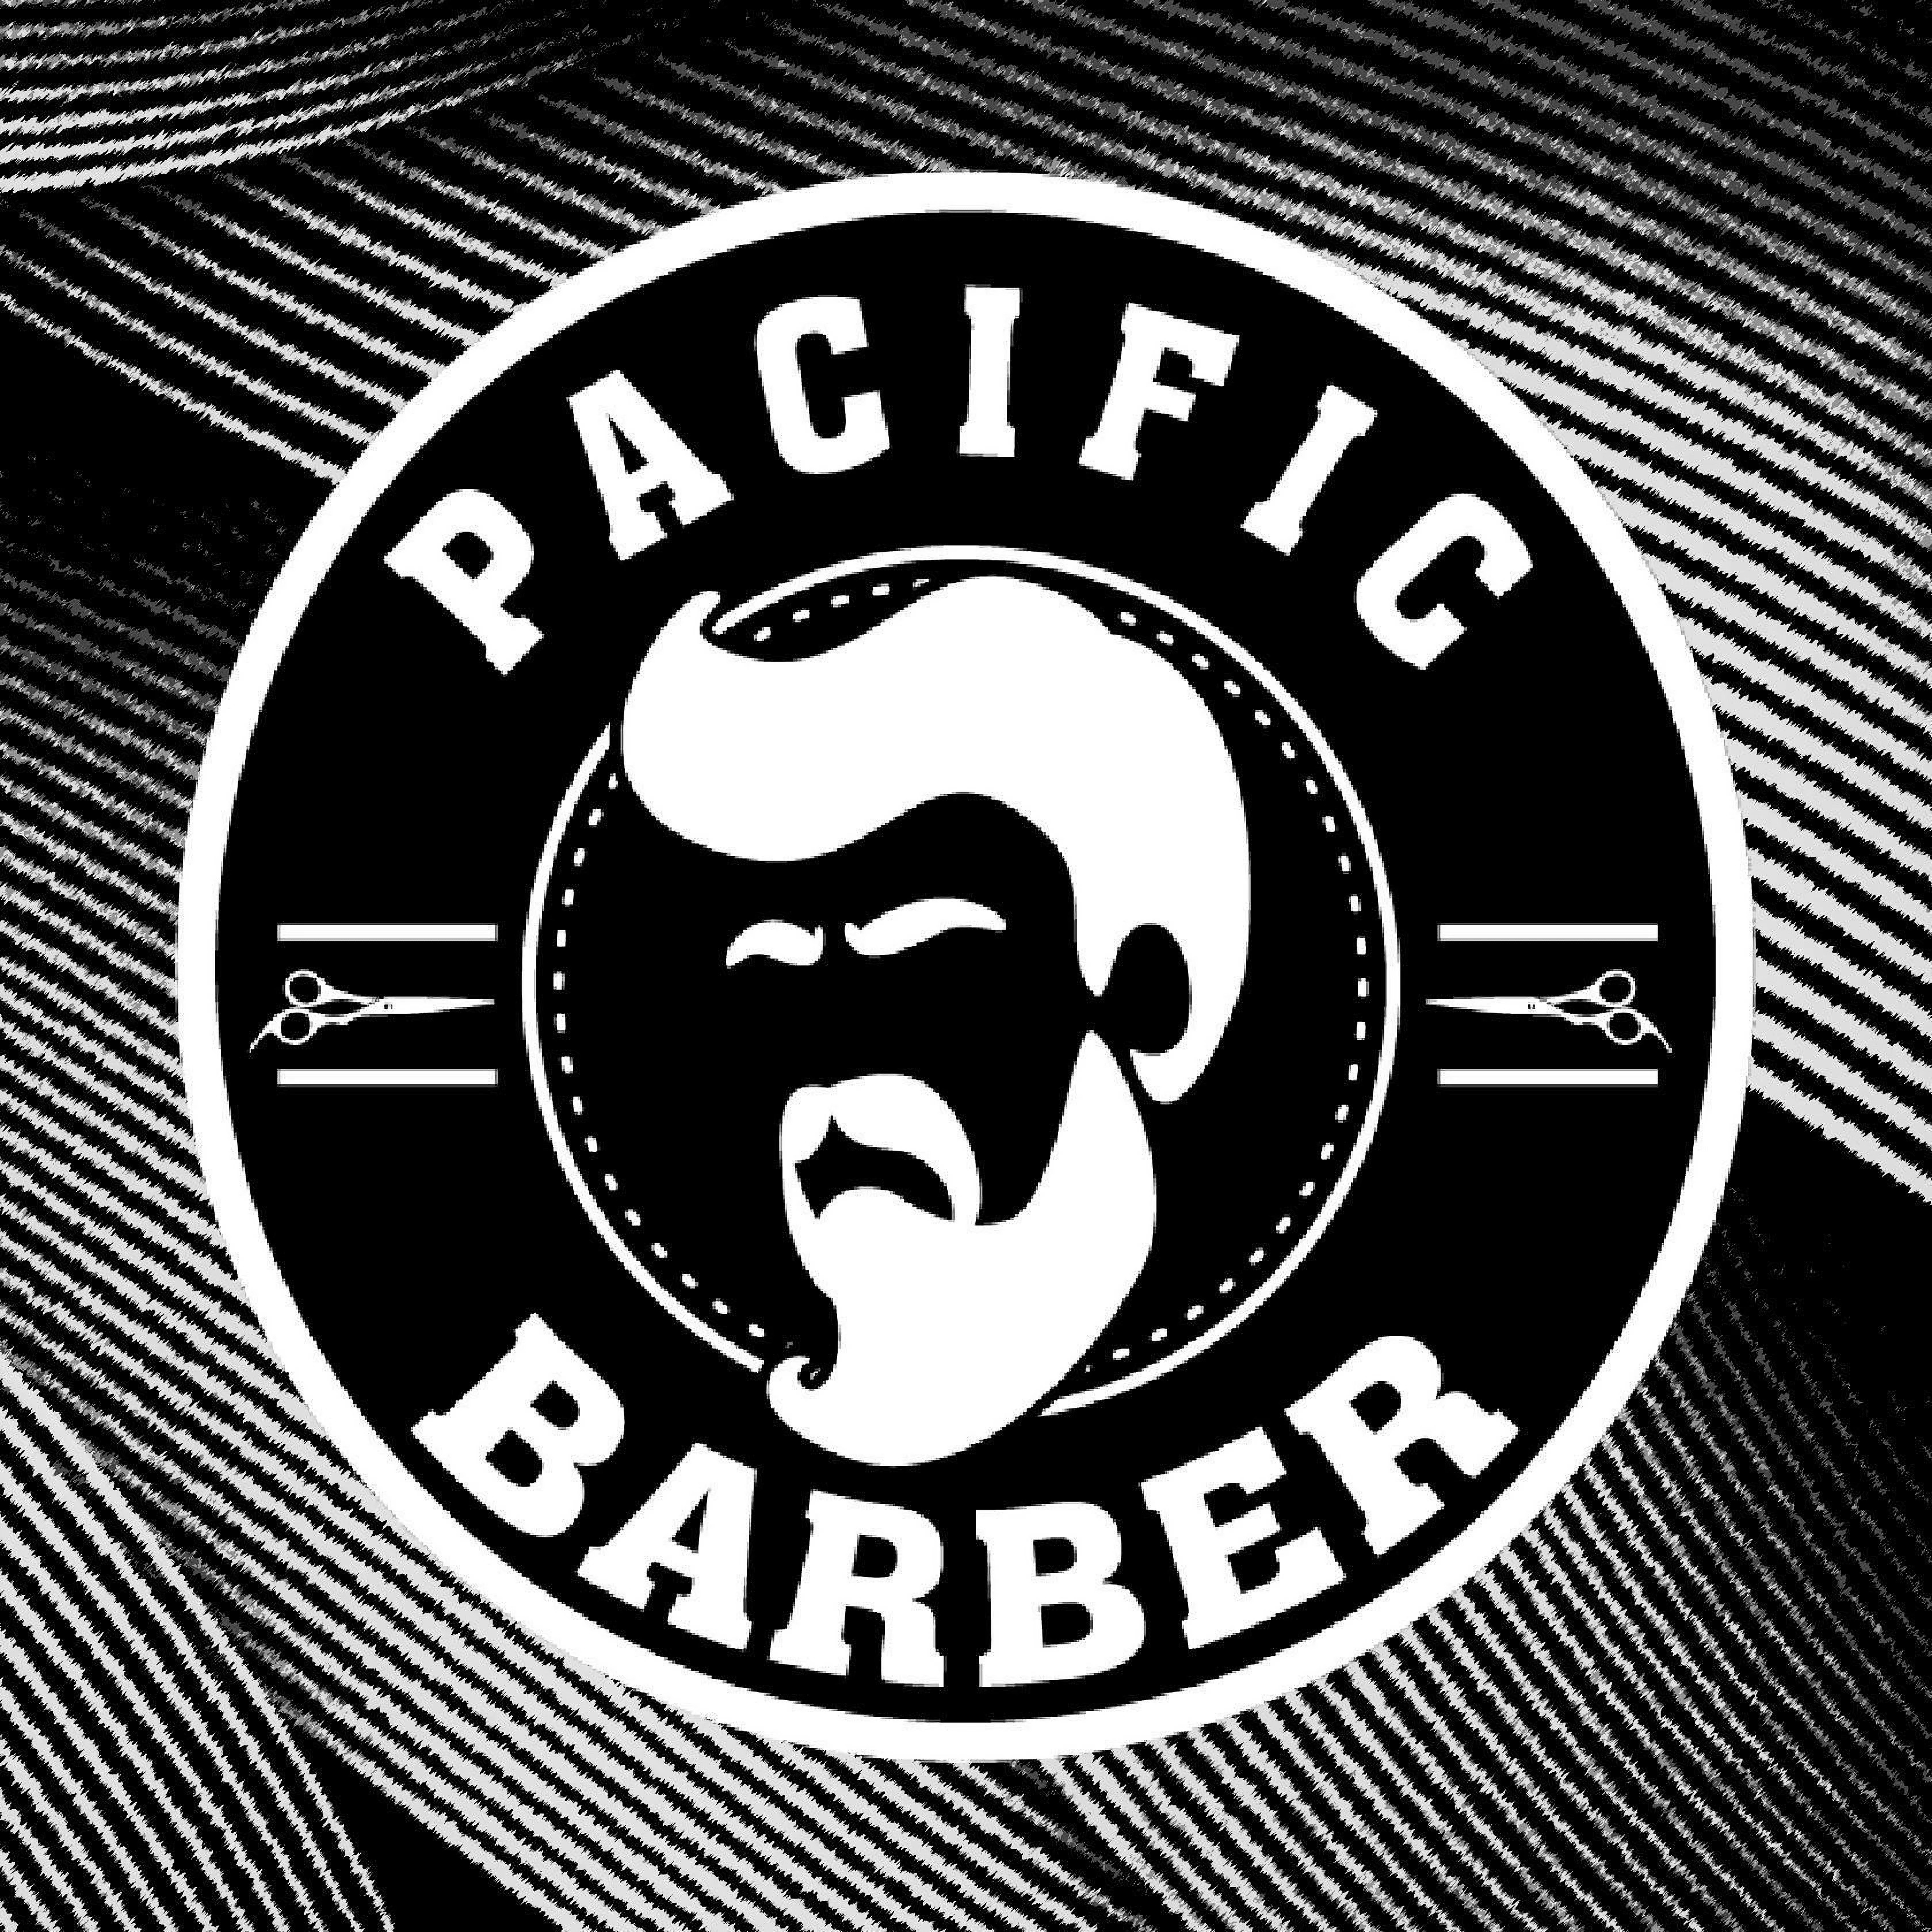 Pacific Barber-1453